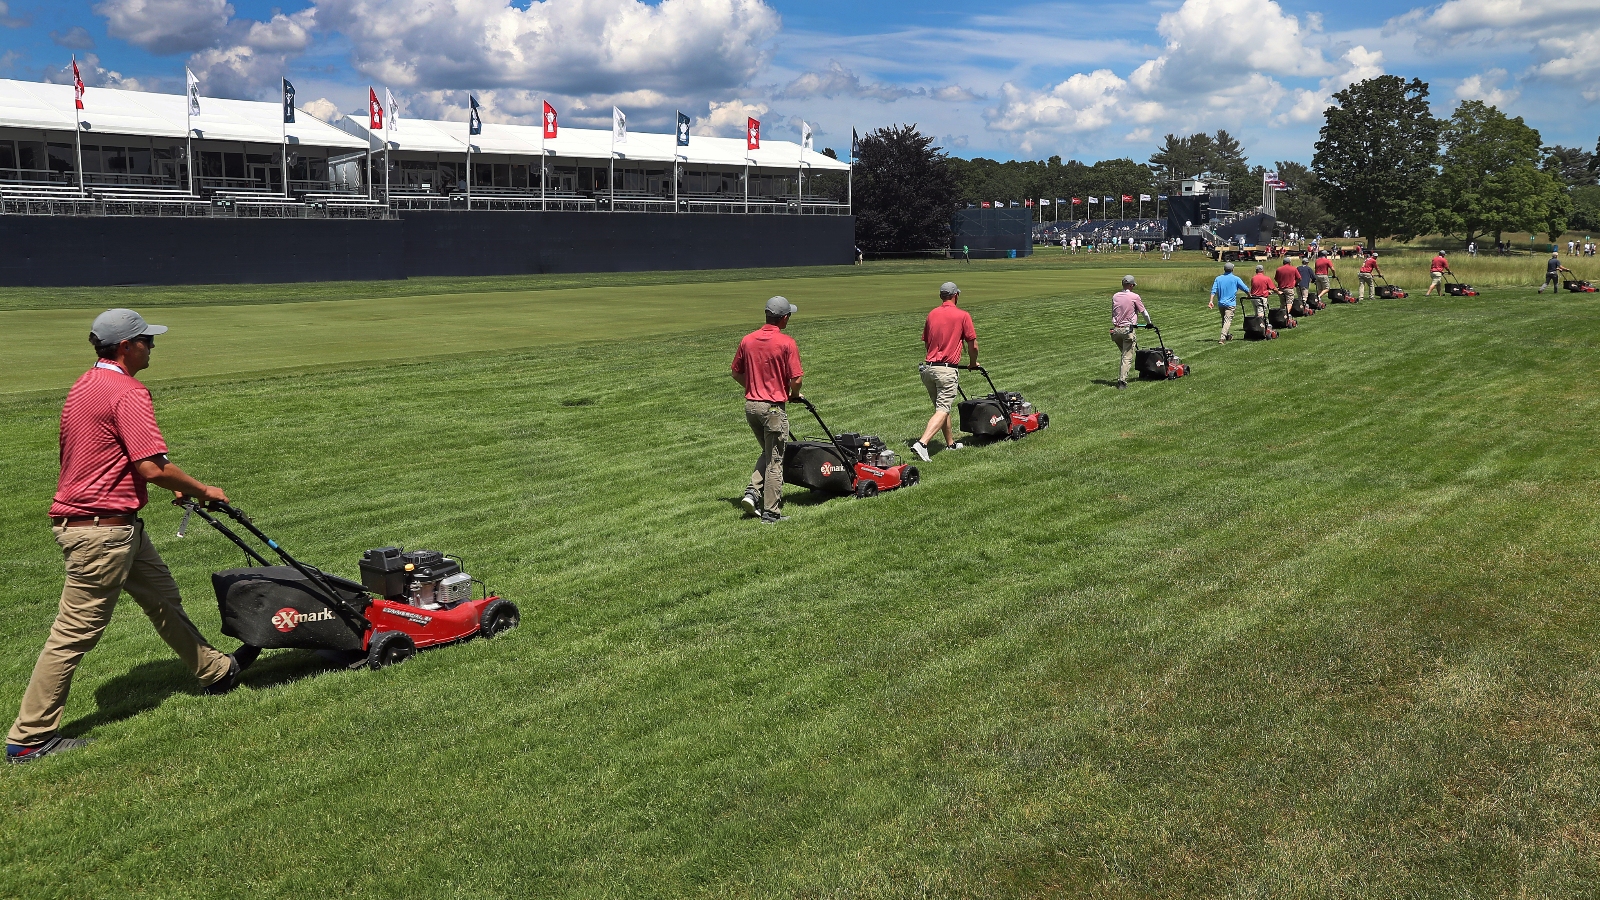 About 19 lawn mowers prepare for the US Open at The Country Club in Brookline, MA, on June 13, 2022.